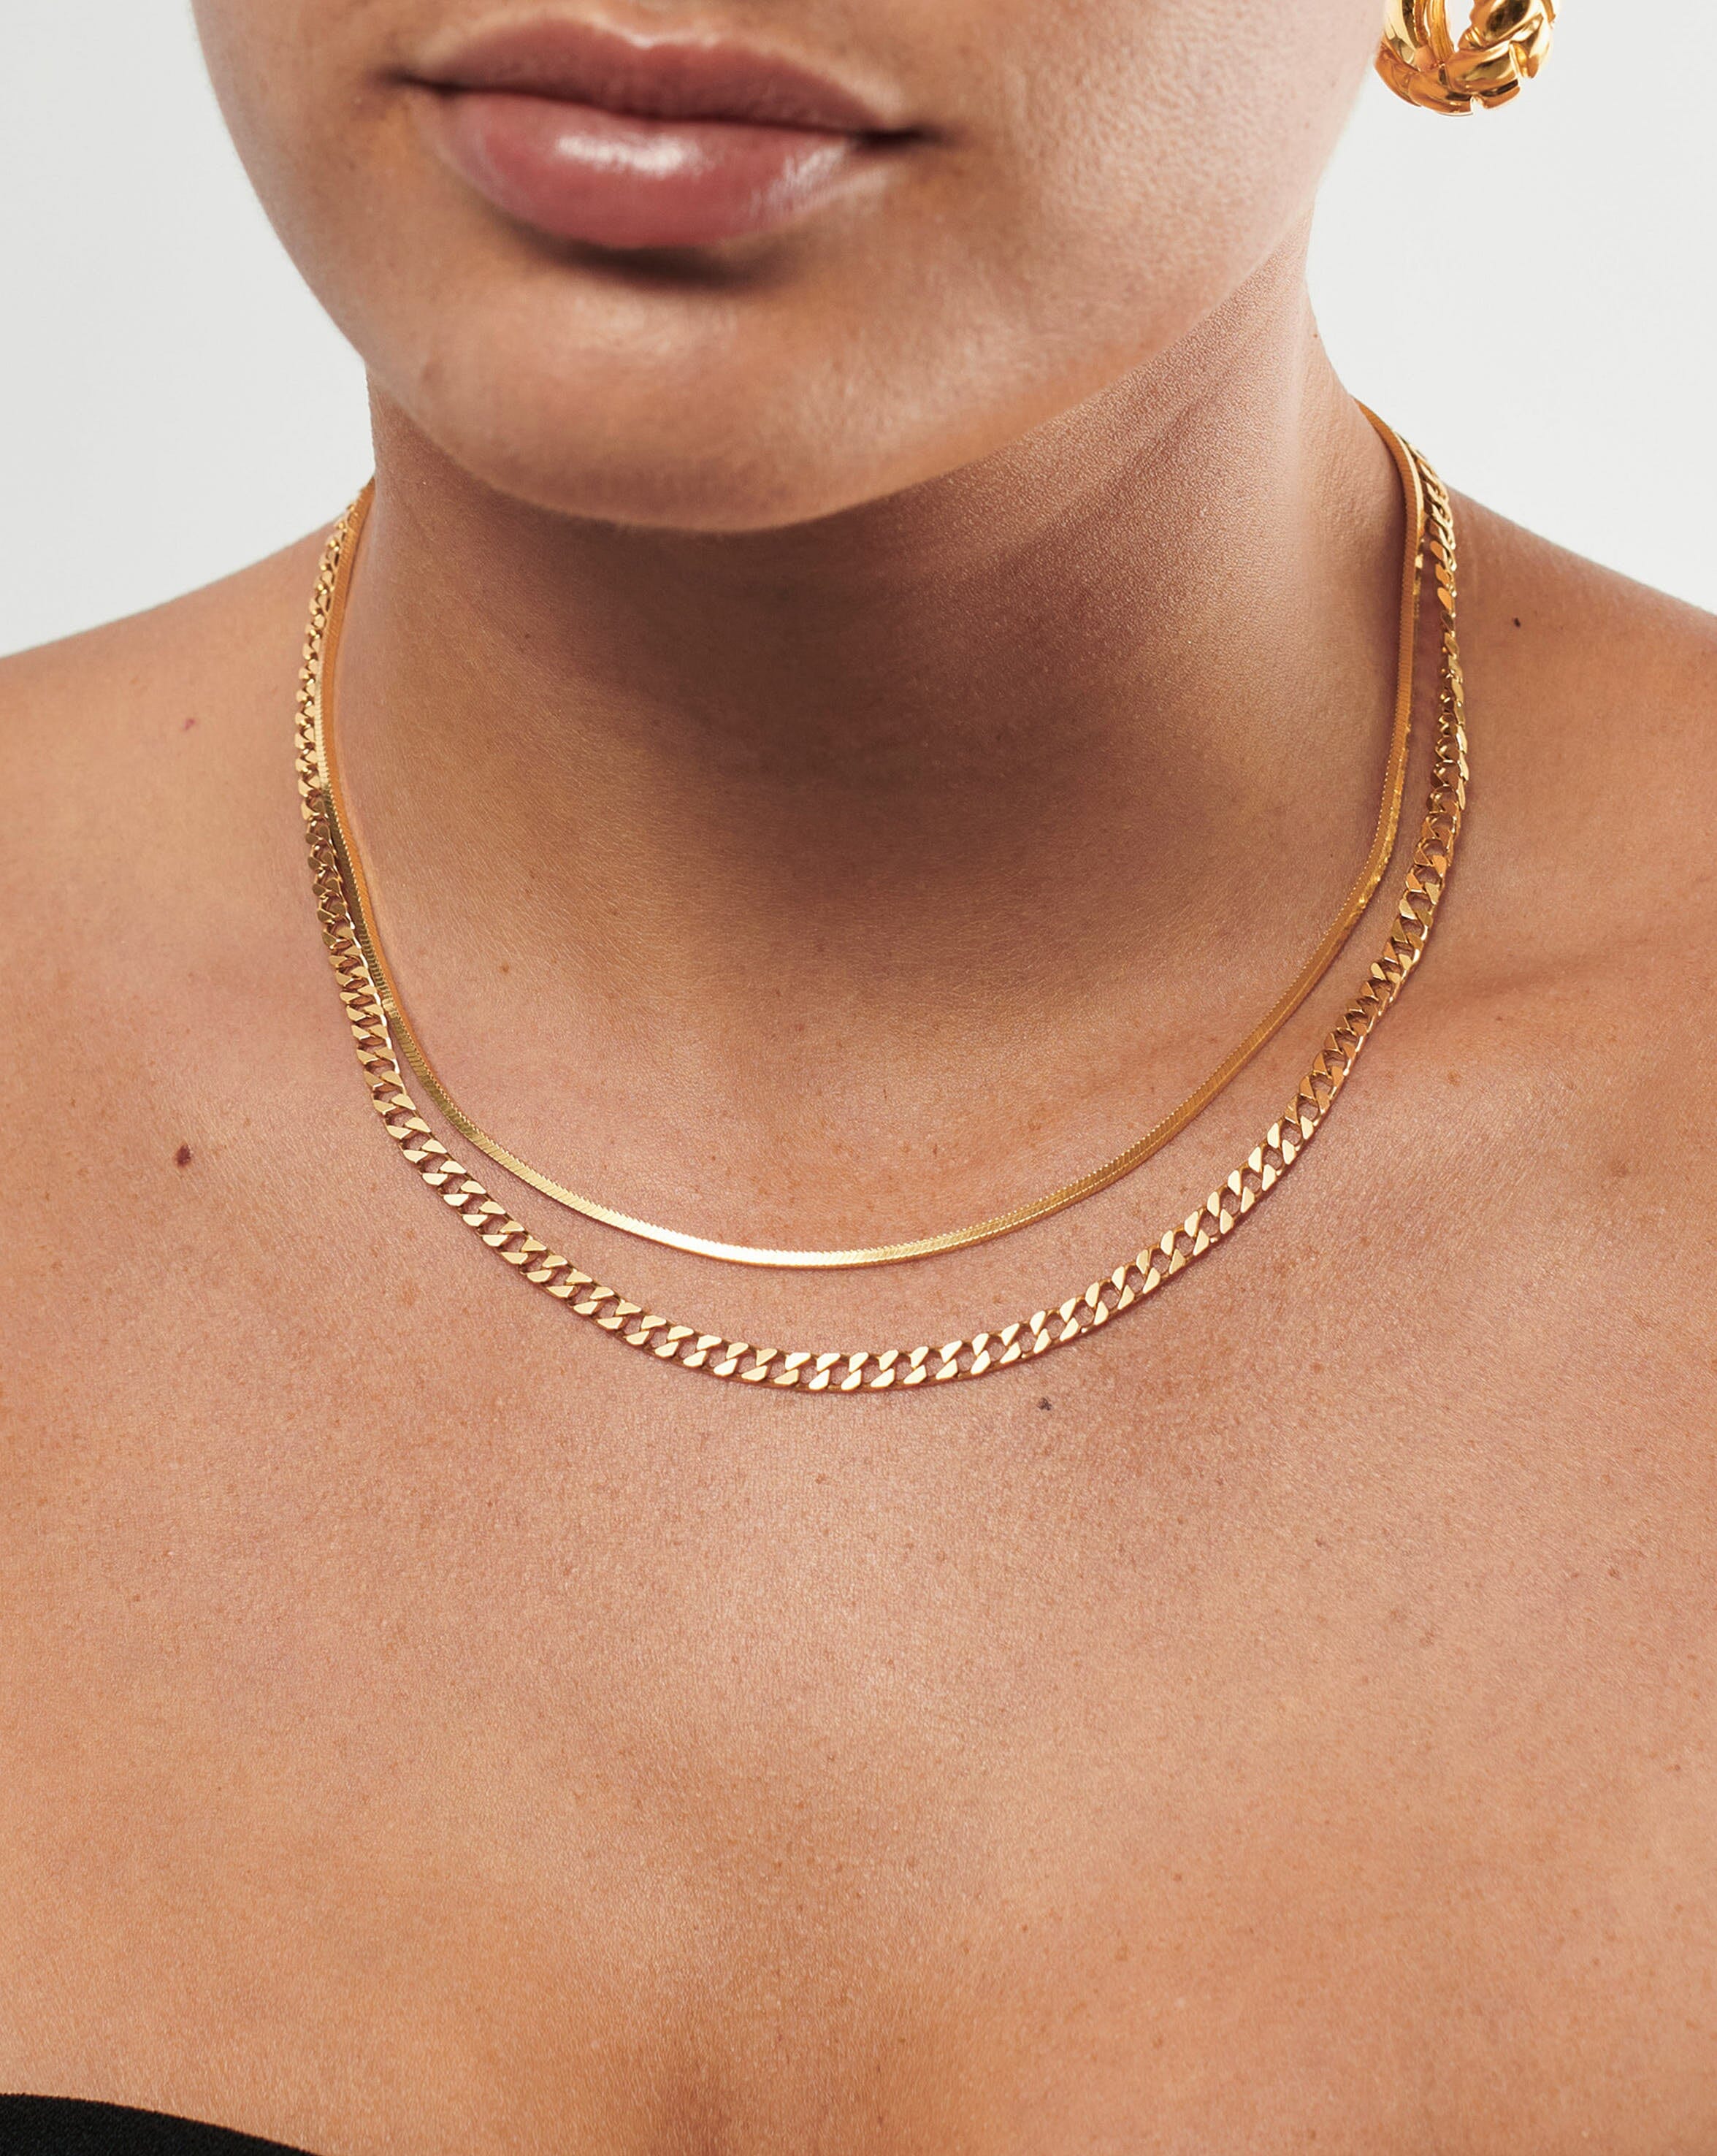 Lucy Williams Snake Chain Necklace Set | 18ct Gold Plated Vermeil